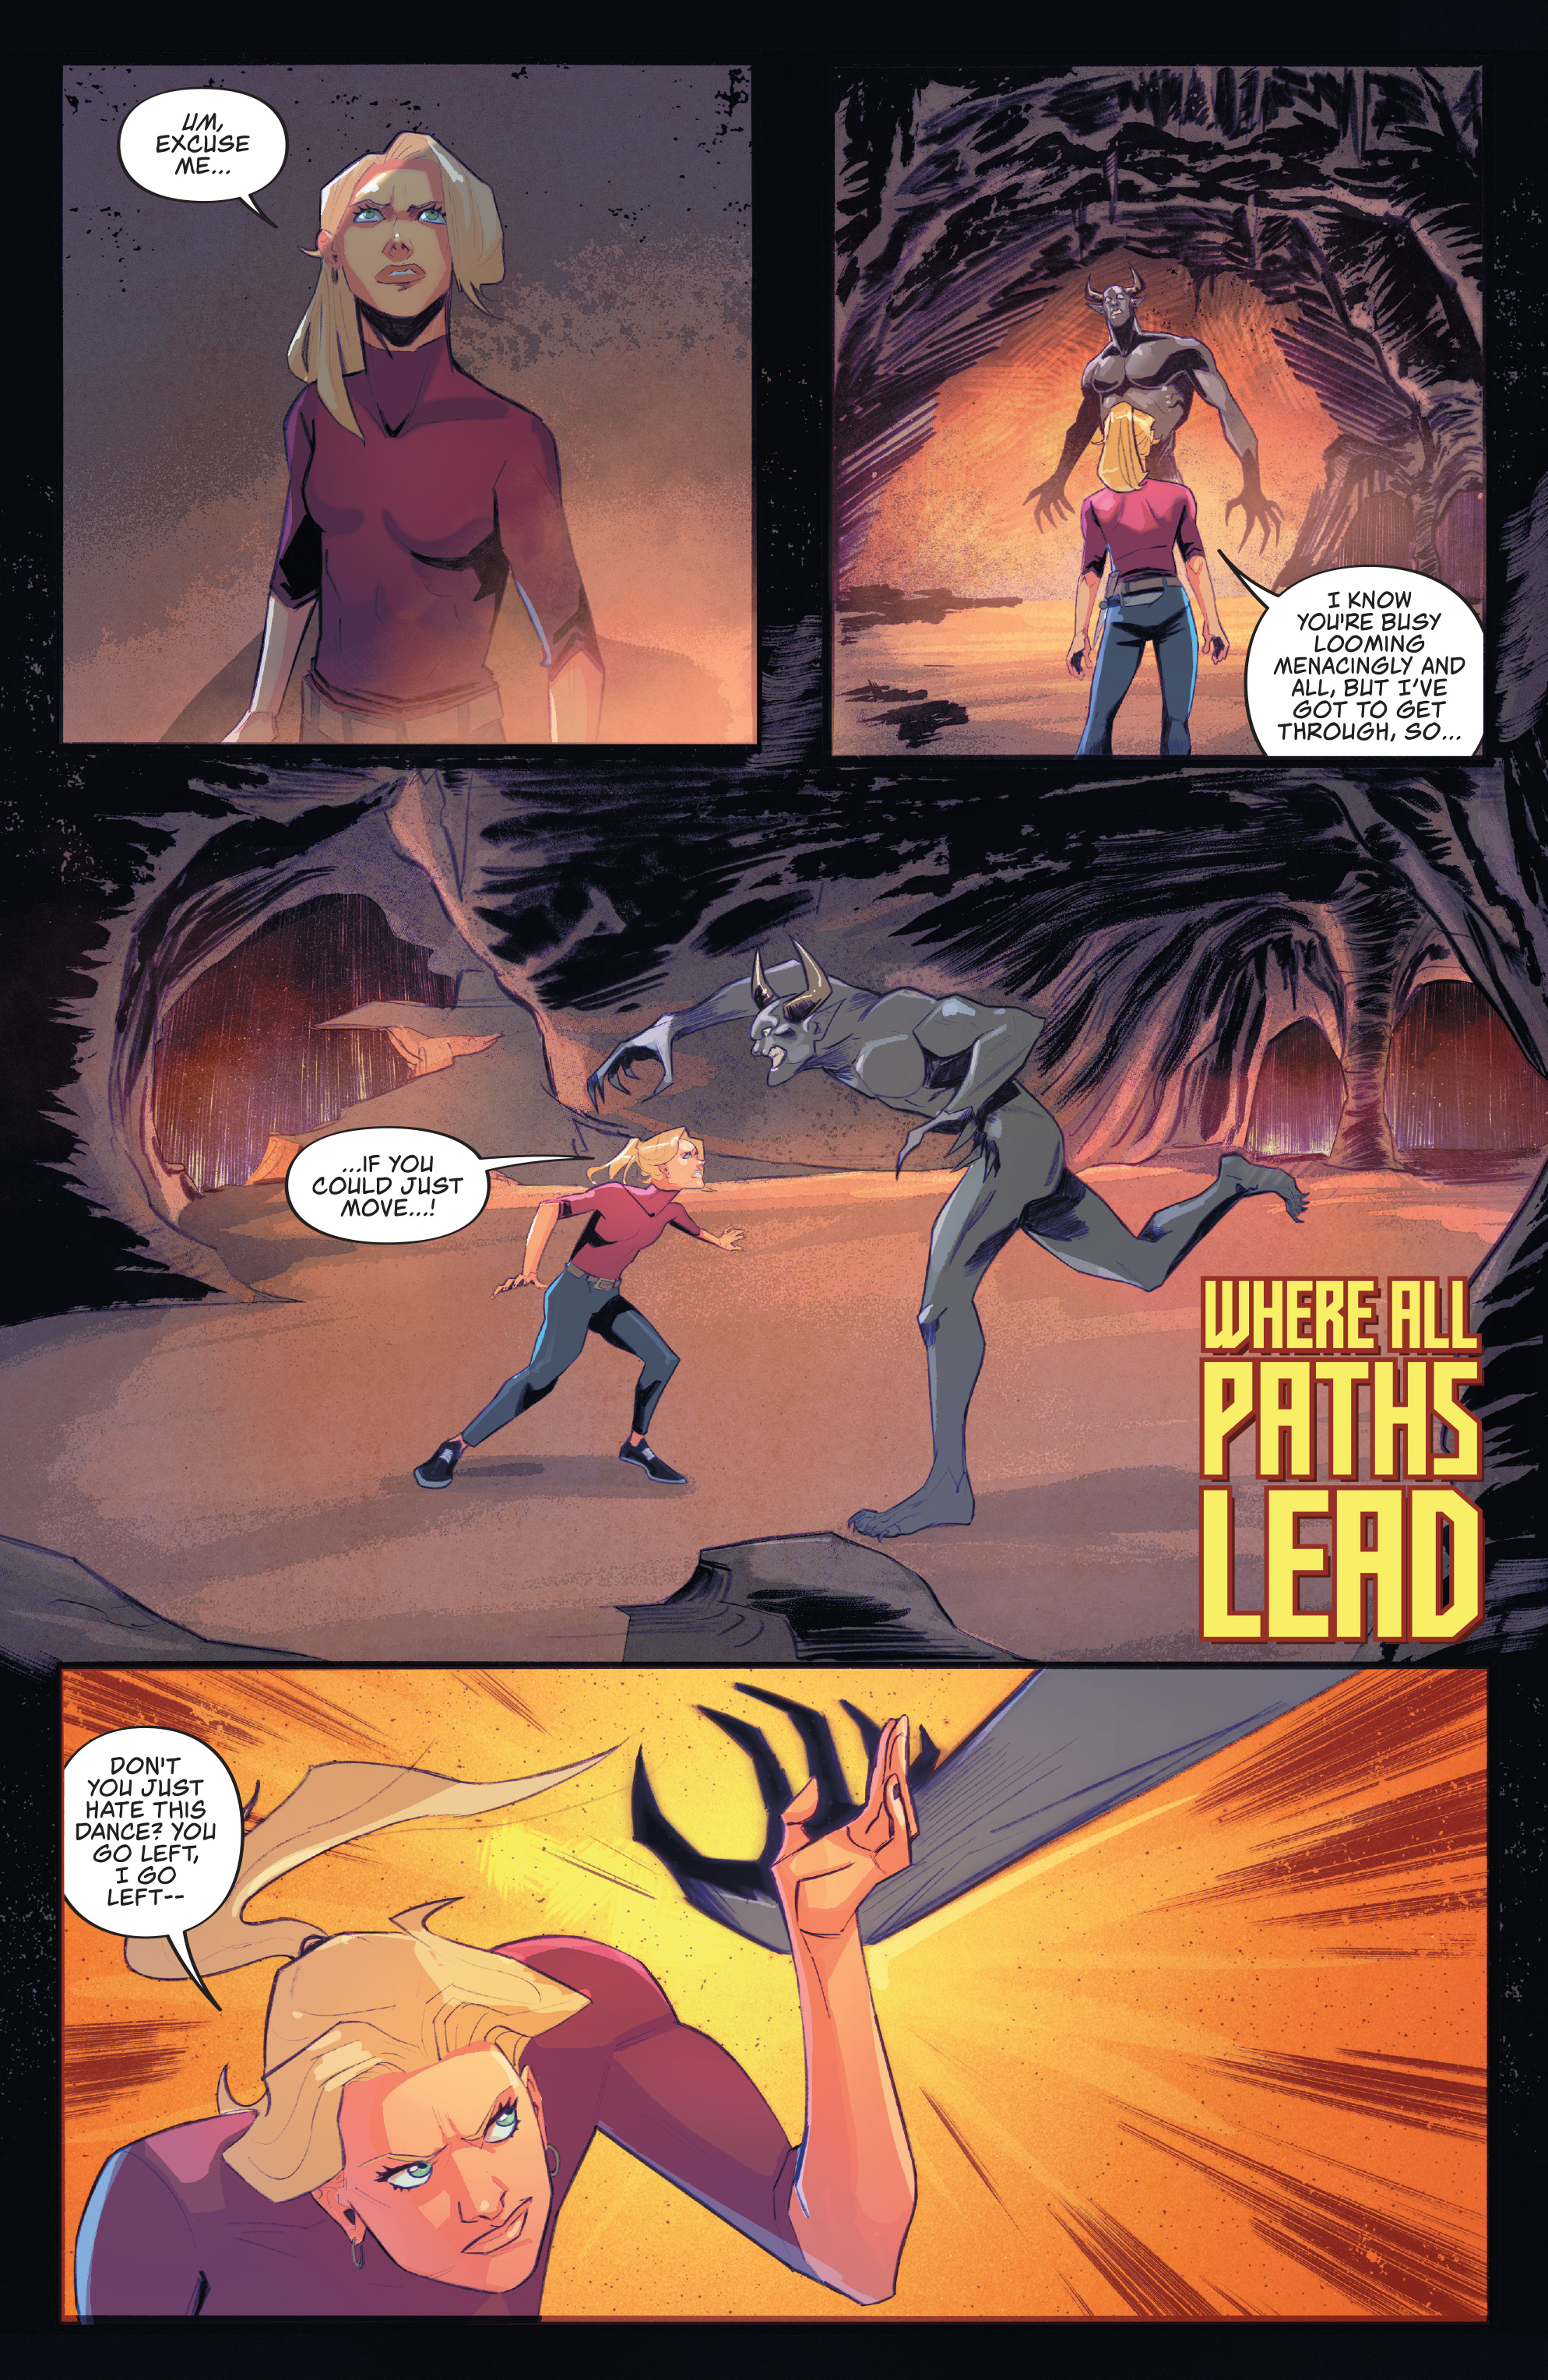 Buffy the Vampire Slayer: Every Generation (2020-): Chapter 1 - Page 3